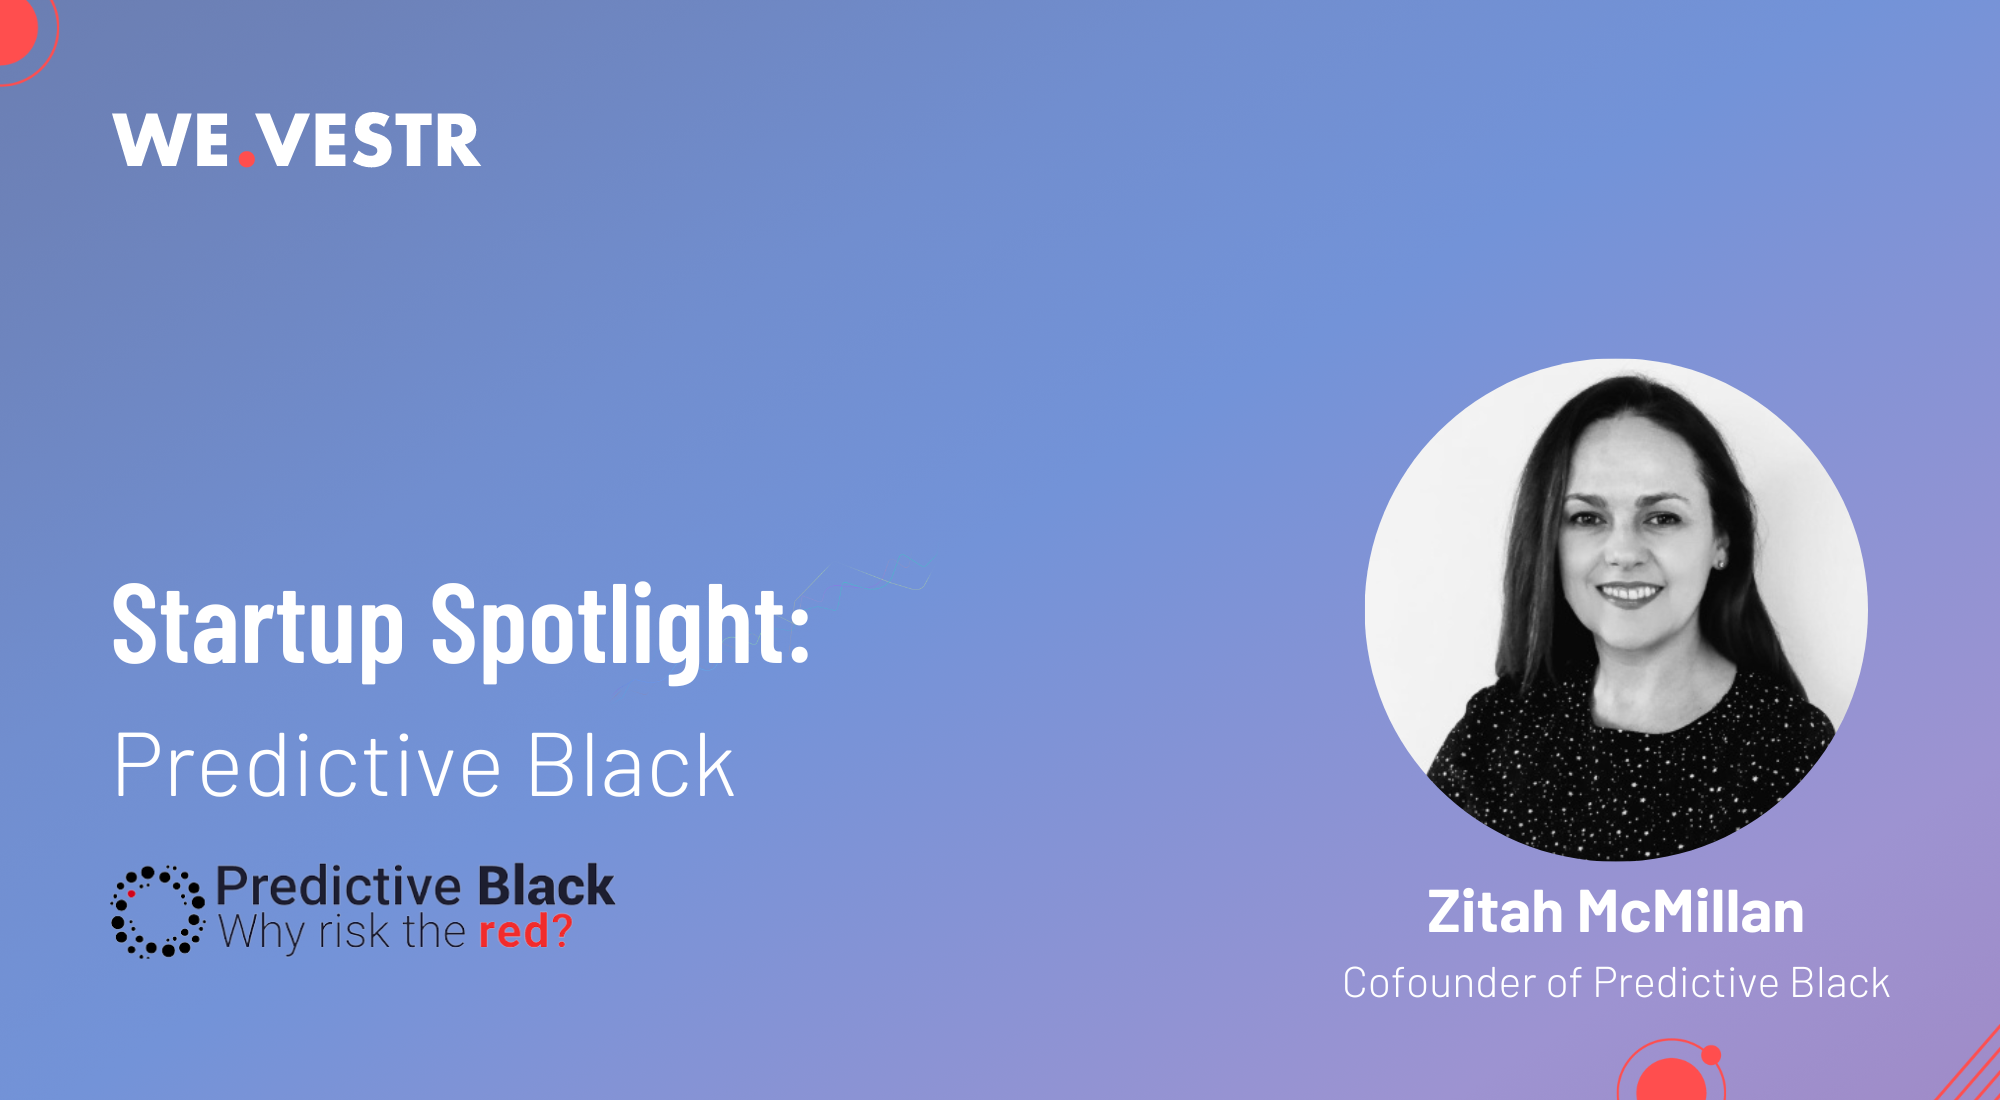 An interview with Zitah McMillan, Cofounder of Predictive Black